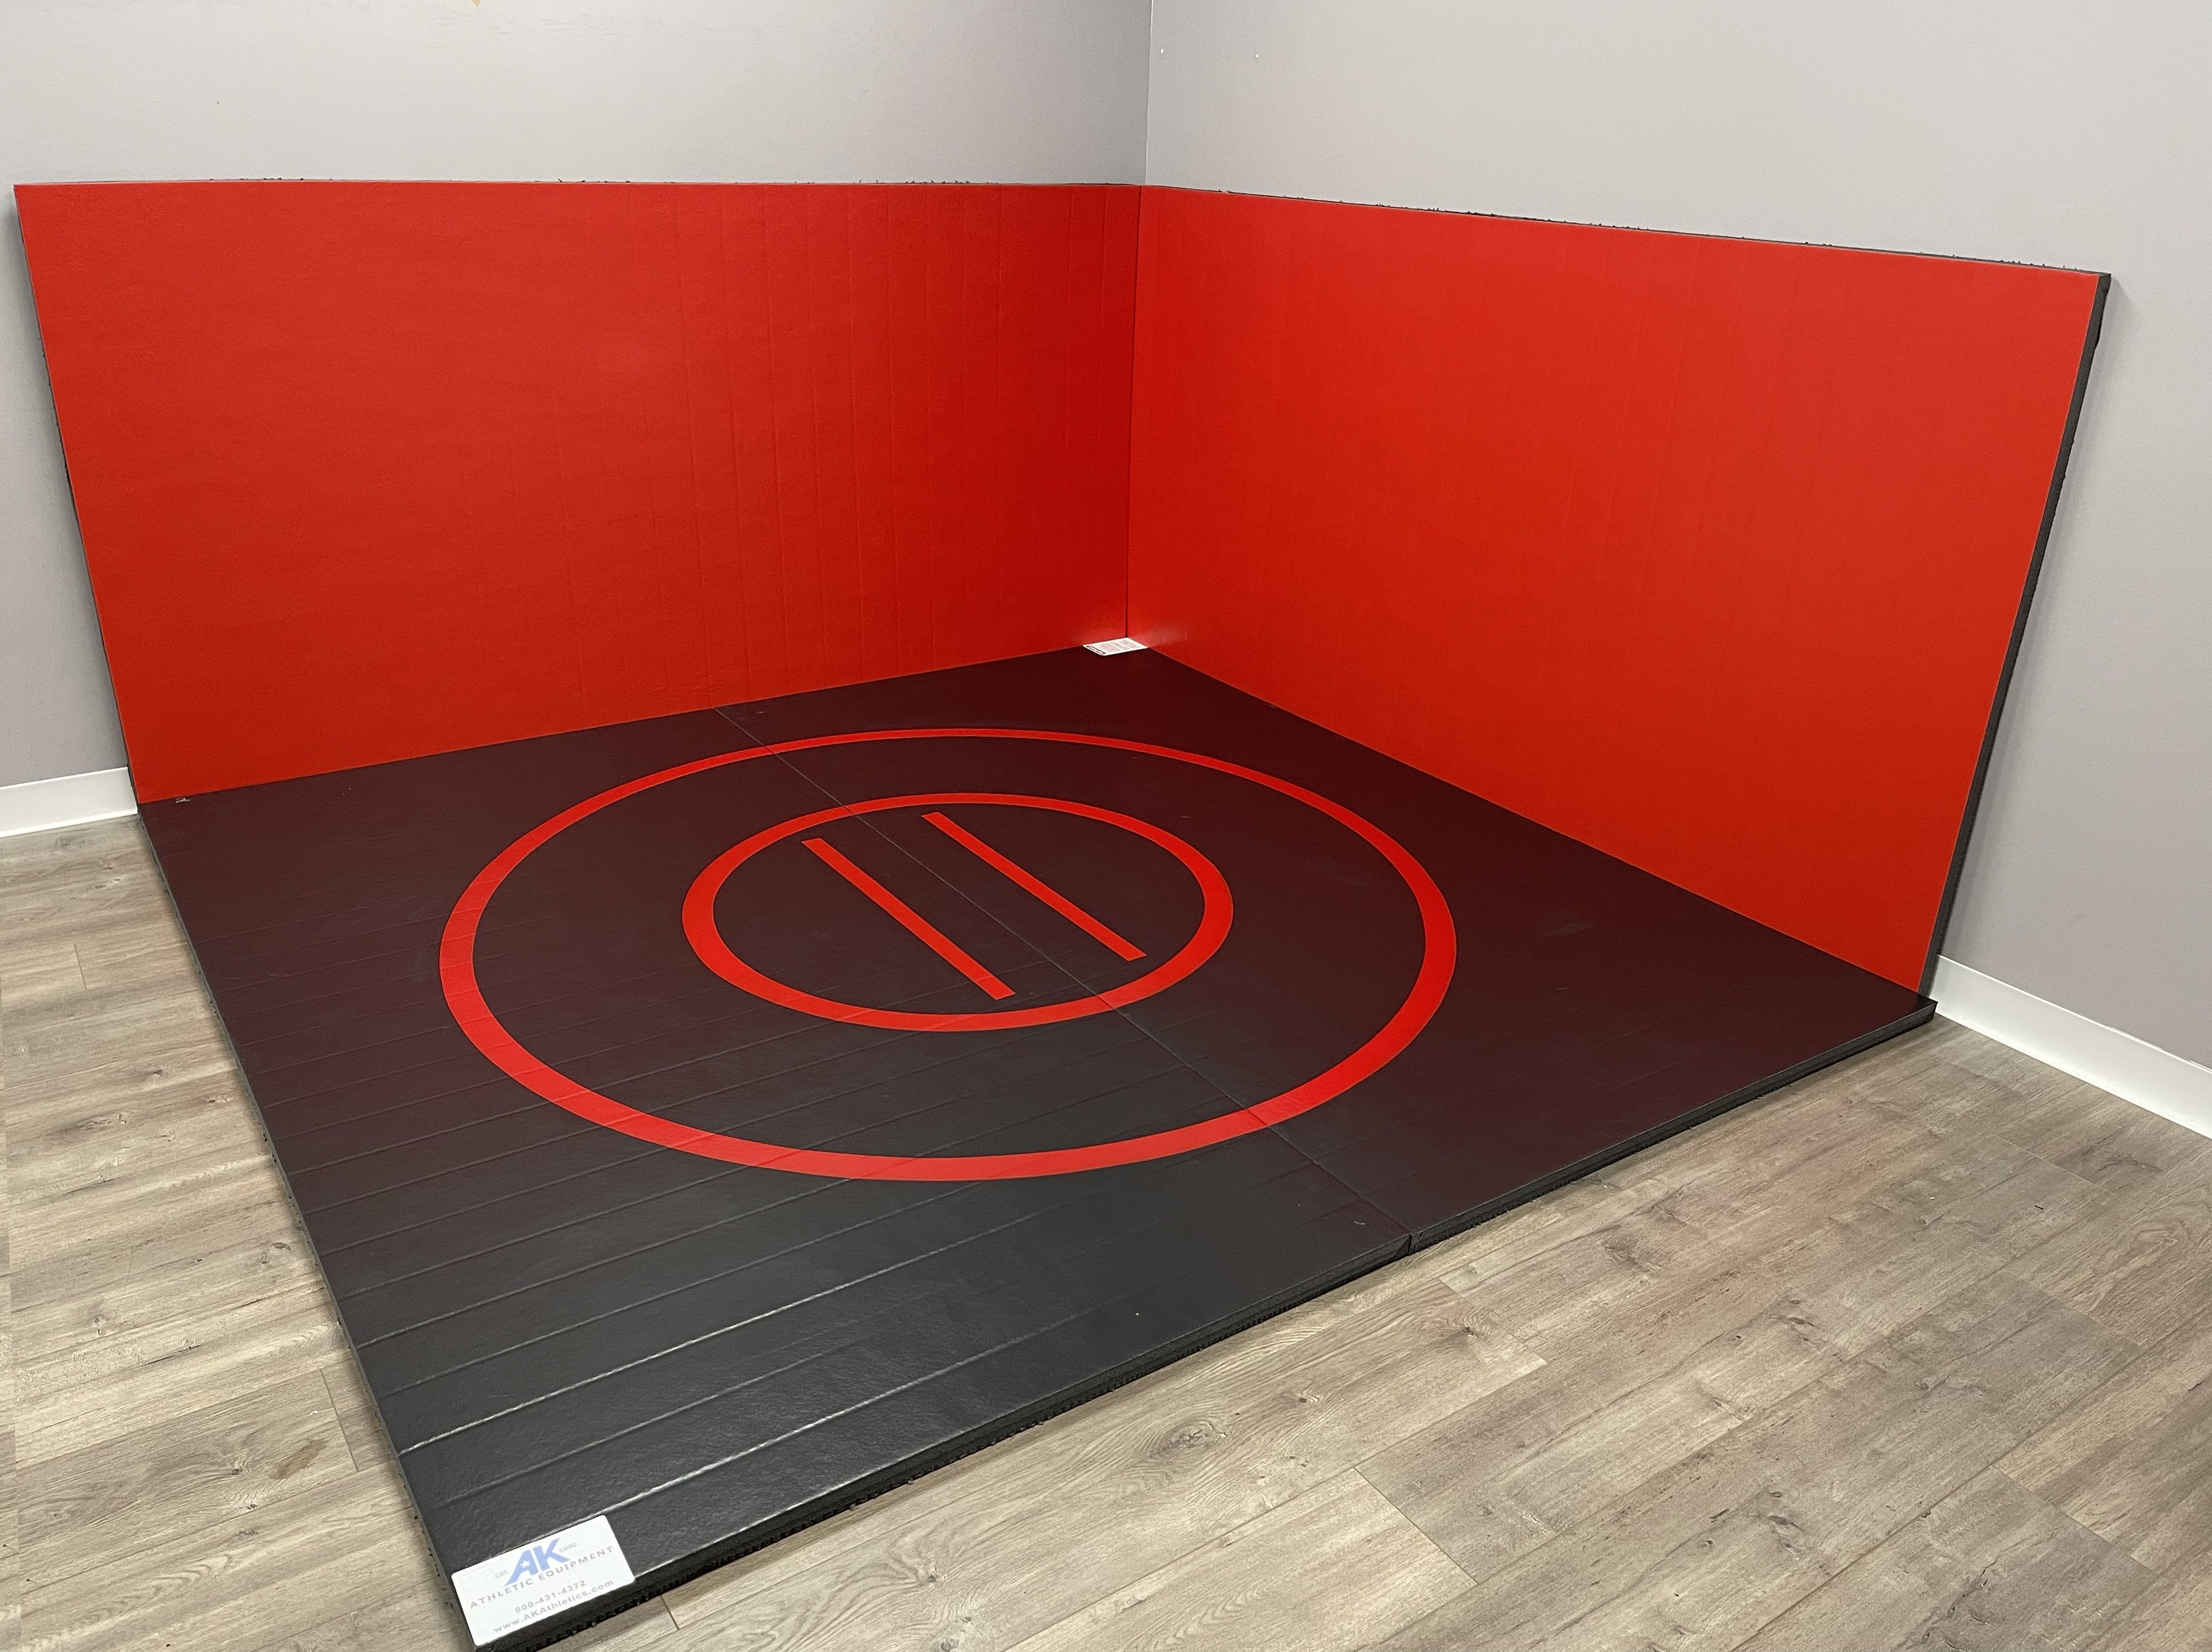 Holiday Shop Instant Wrestling Room 8' x 8' wrestling mat and Removable Roll Up Wall Pads Package